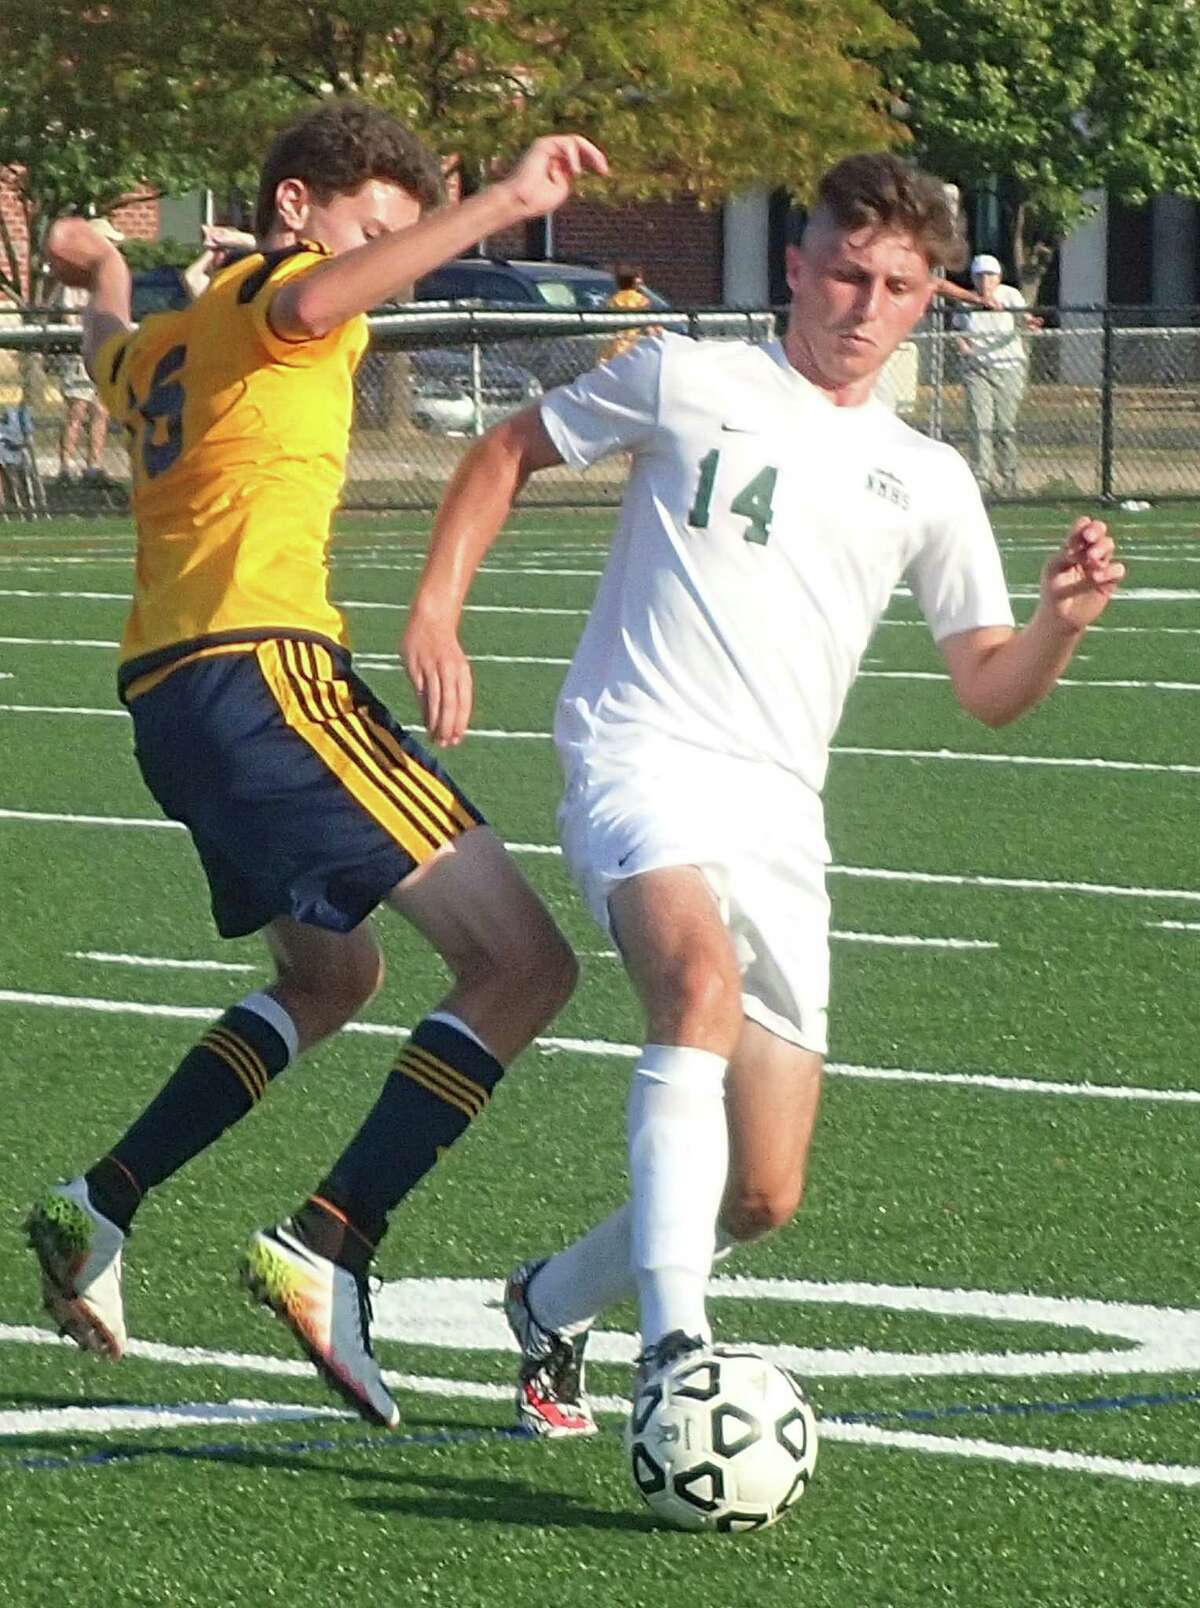 New Milford's Shane Fedigan, right, battles for possession of the ball with Weston's Sam Chicha defends during their soccer game at New Milford High School Sept. 13, 2016.